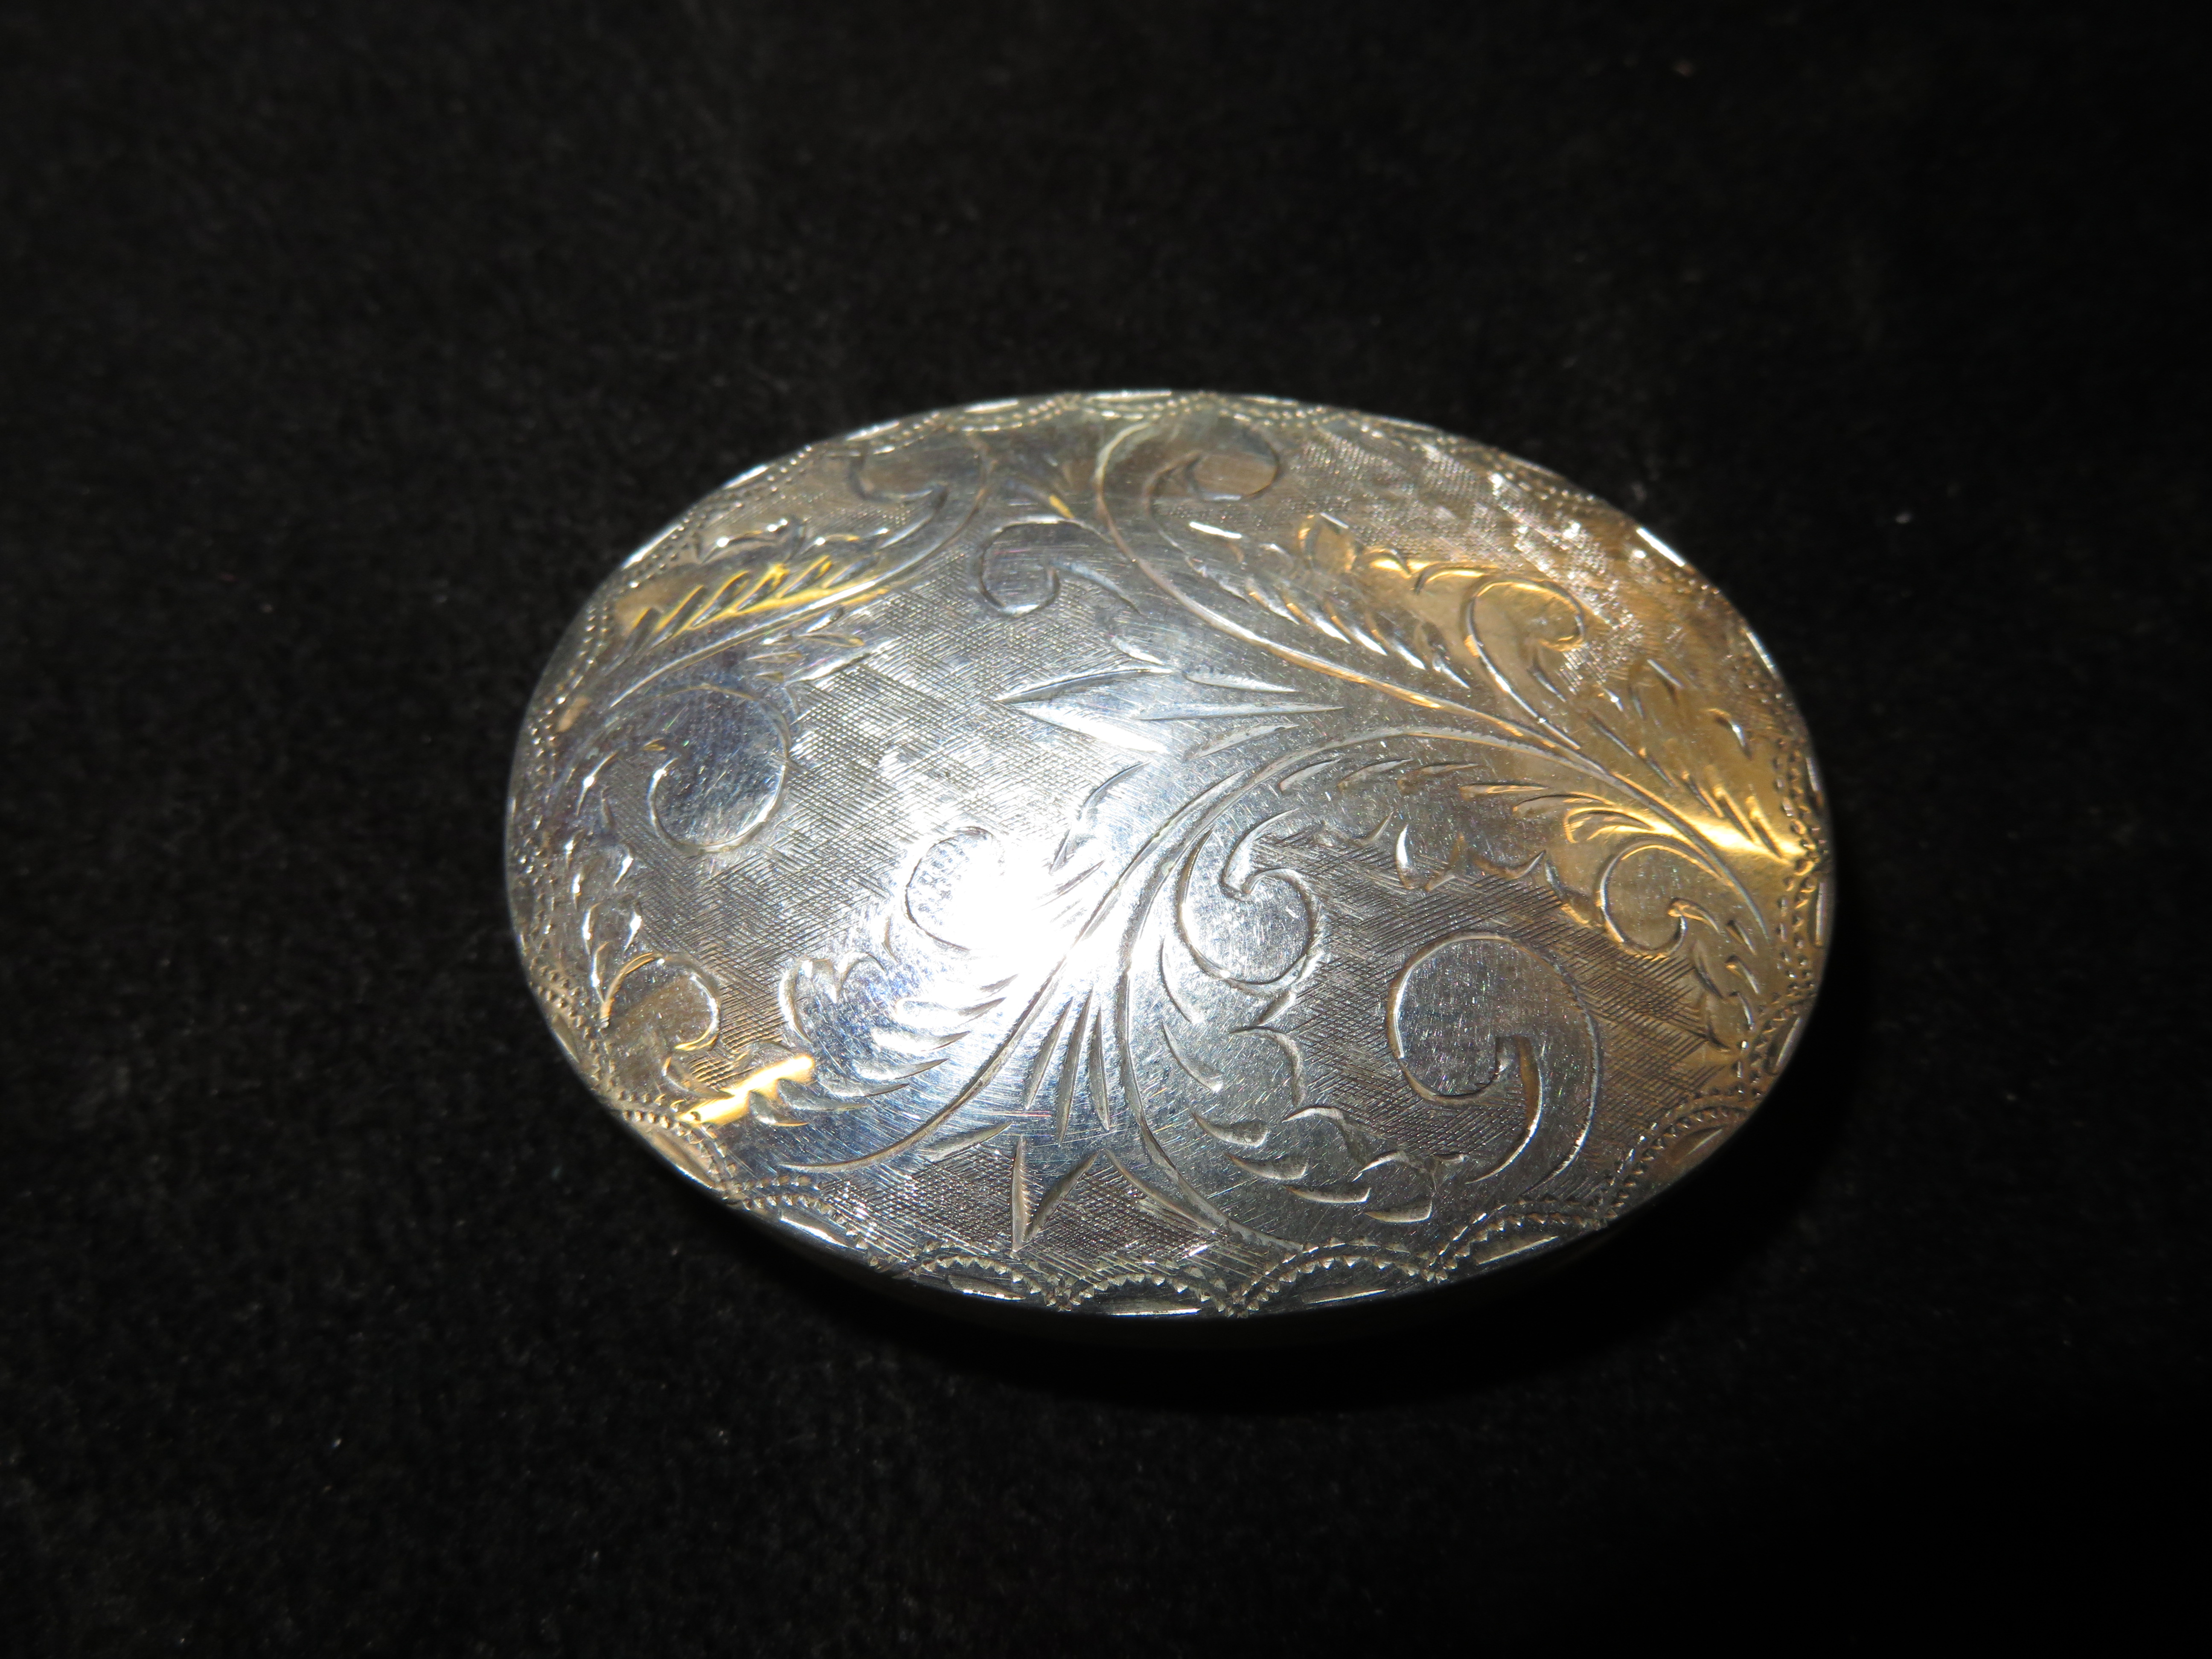 925 silver trinket box with import mark